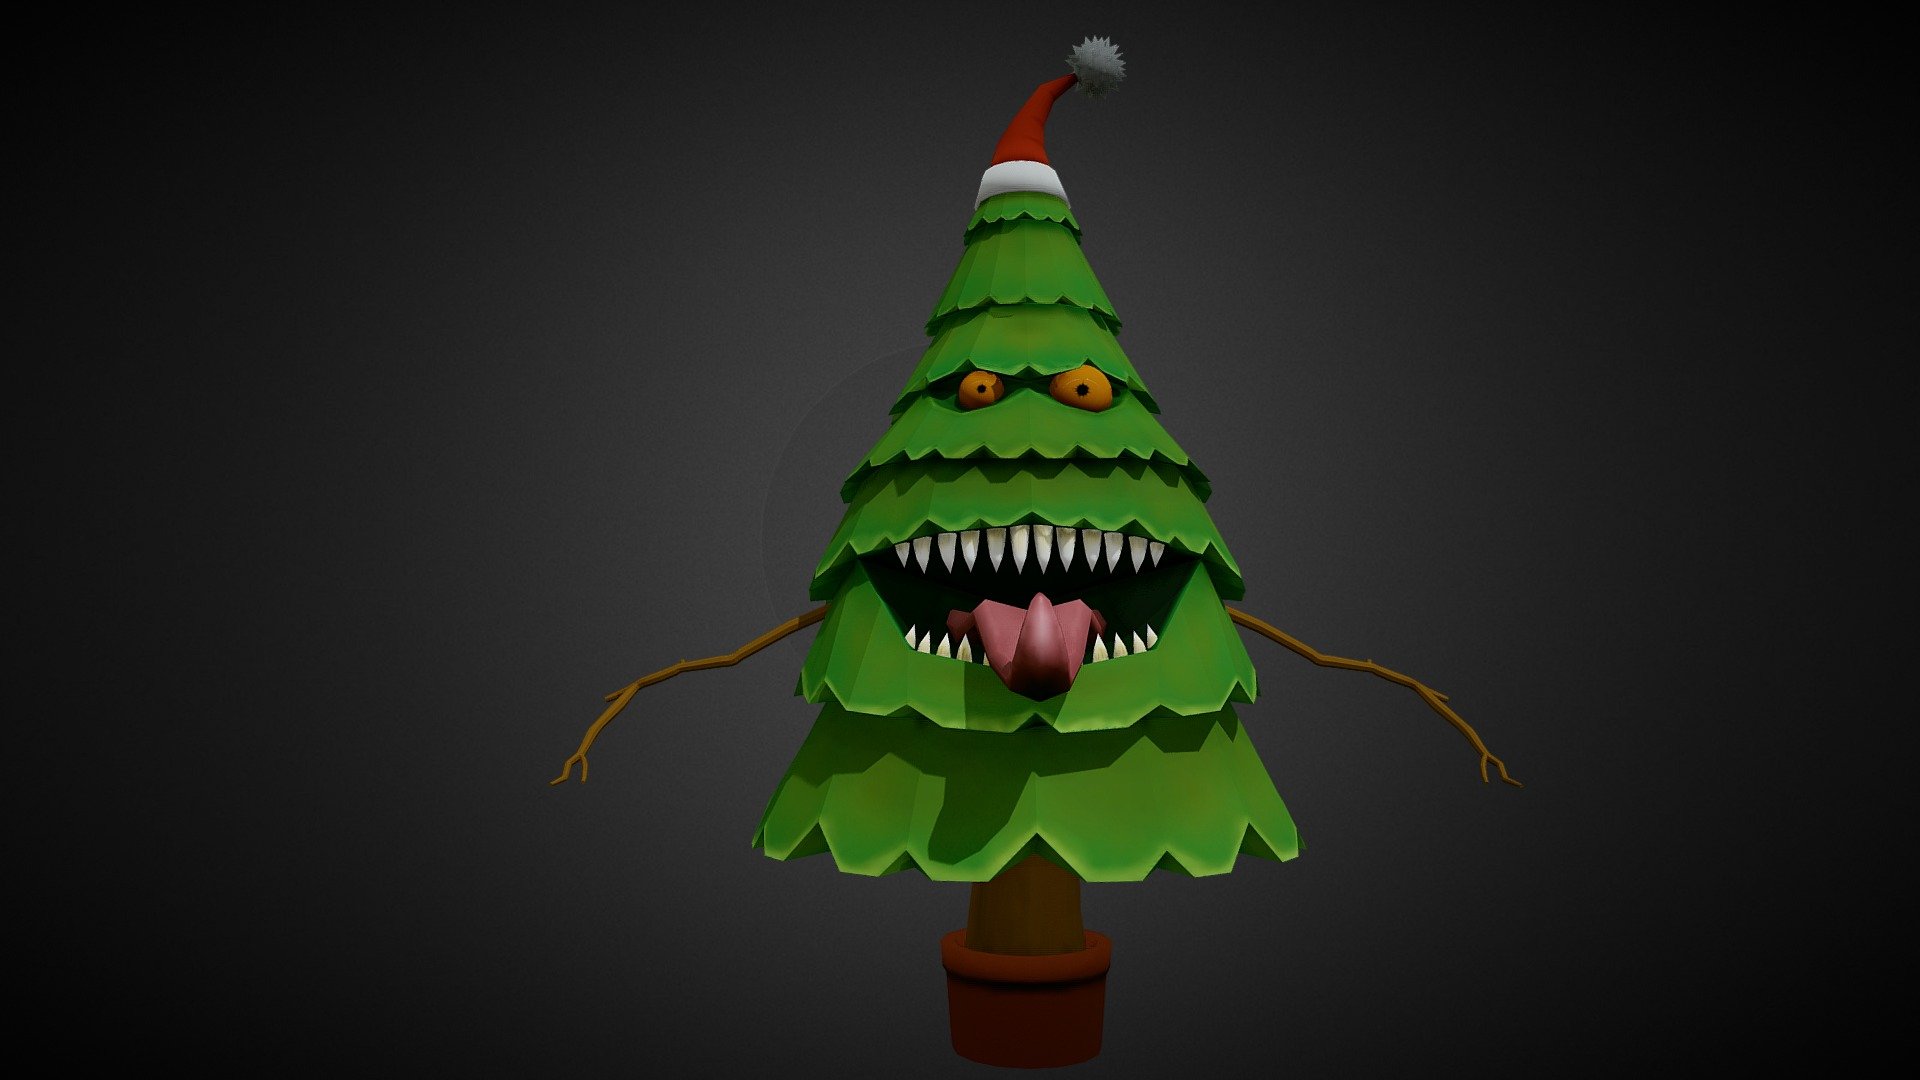 Quick and fairly simple little Low Poly Pine-Tree Monster I did in the spirit of the season.

All work done in Blender 2.9.

Merry Christmas everyone! - XmasTree Monster! - Download Free 3D model by Wordofcurse 3d model